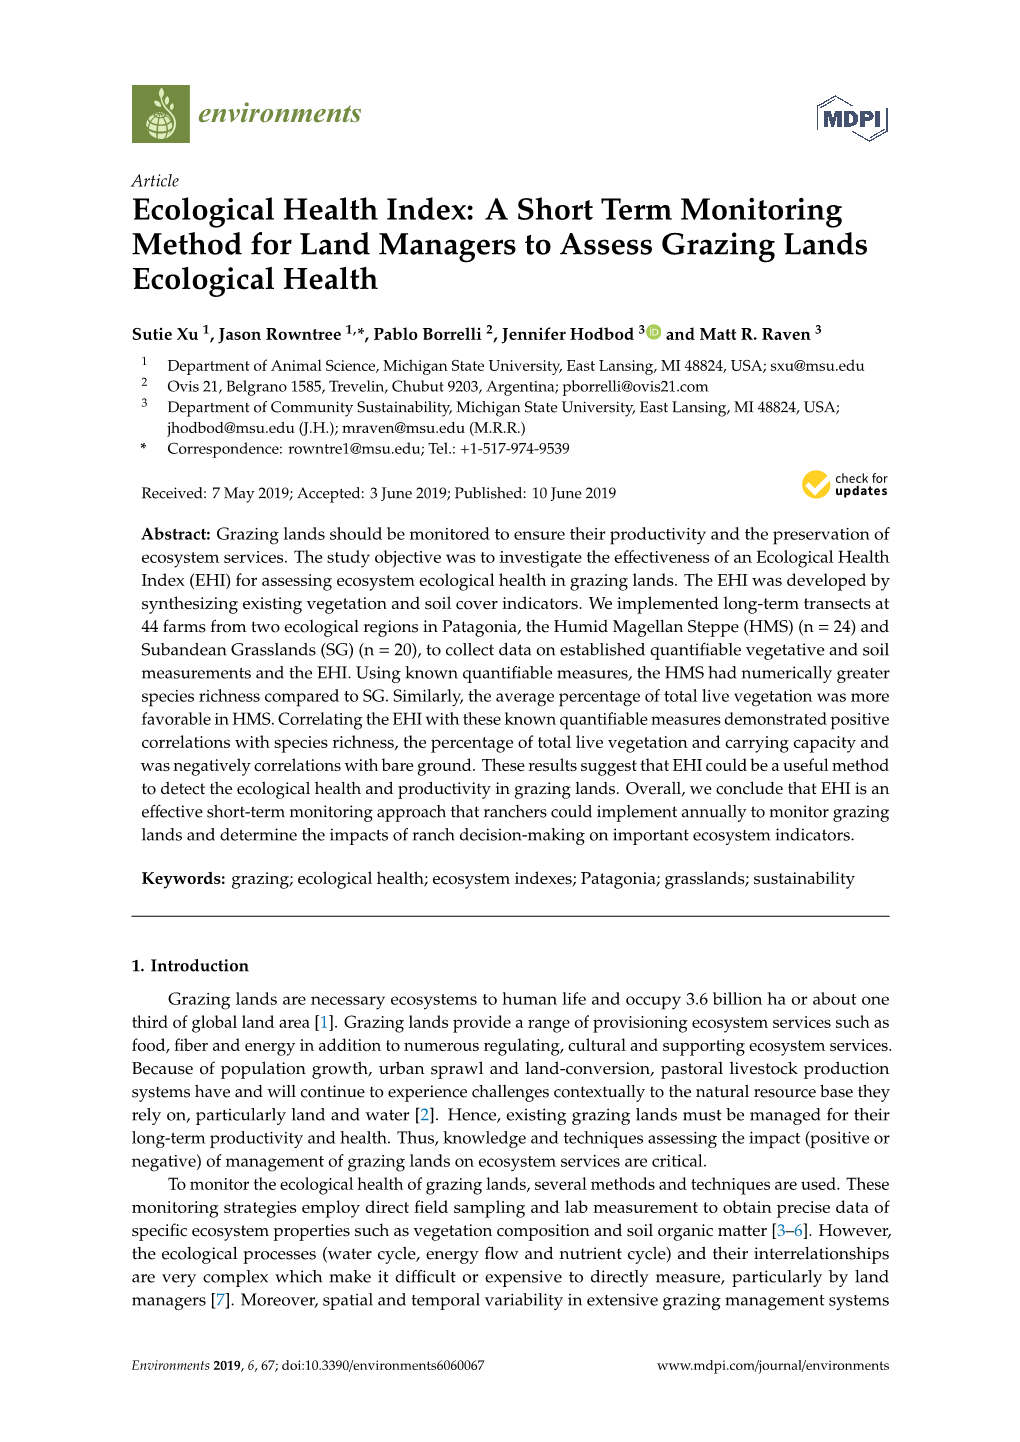 Ecological Health Index: a Short Term Monitoring Method for Land Managers to Assess Grazing Lands Ecological Health